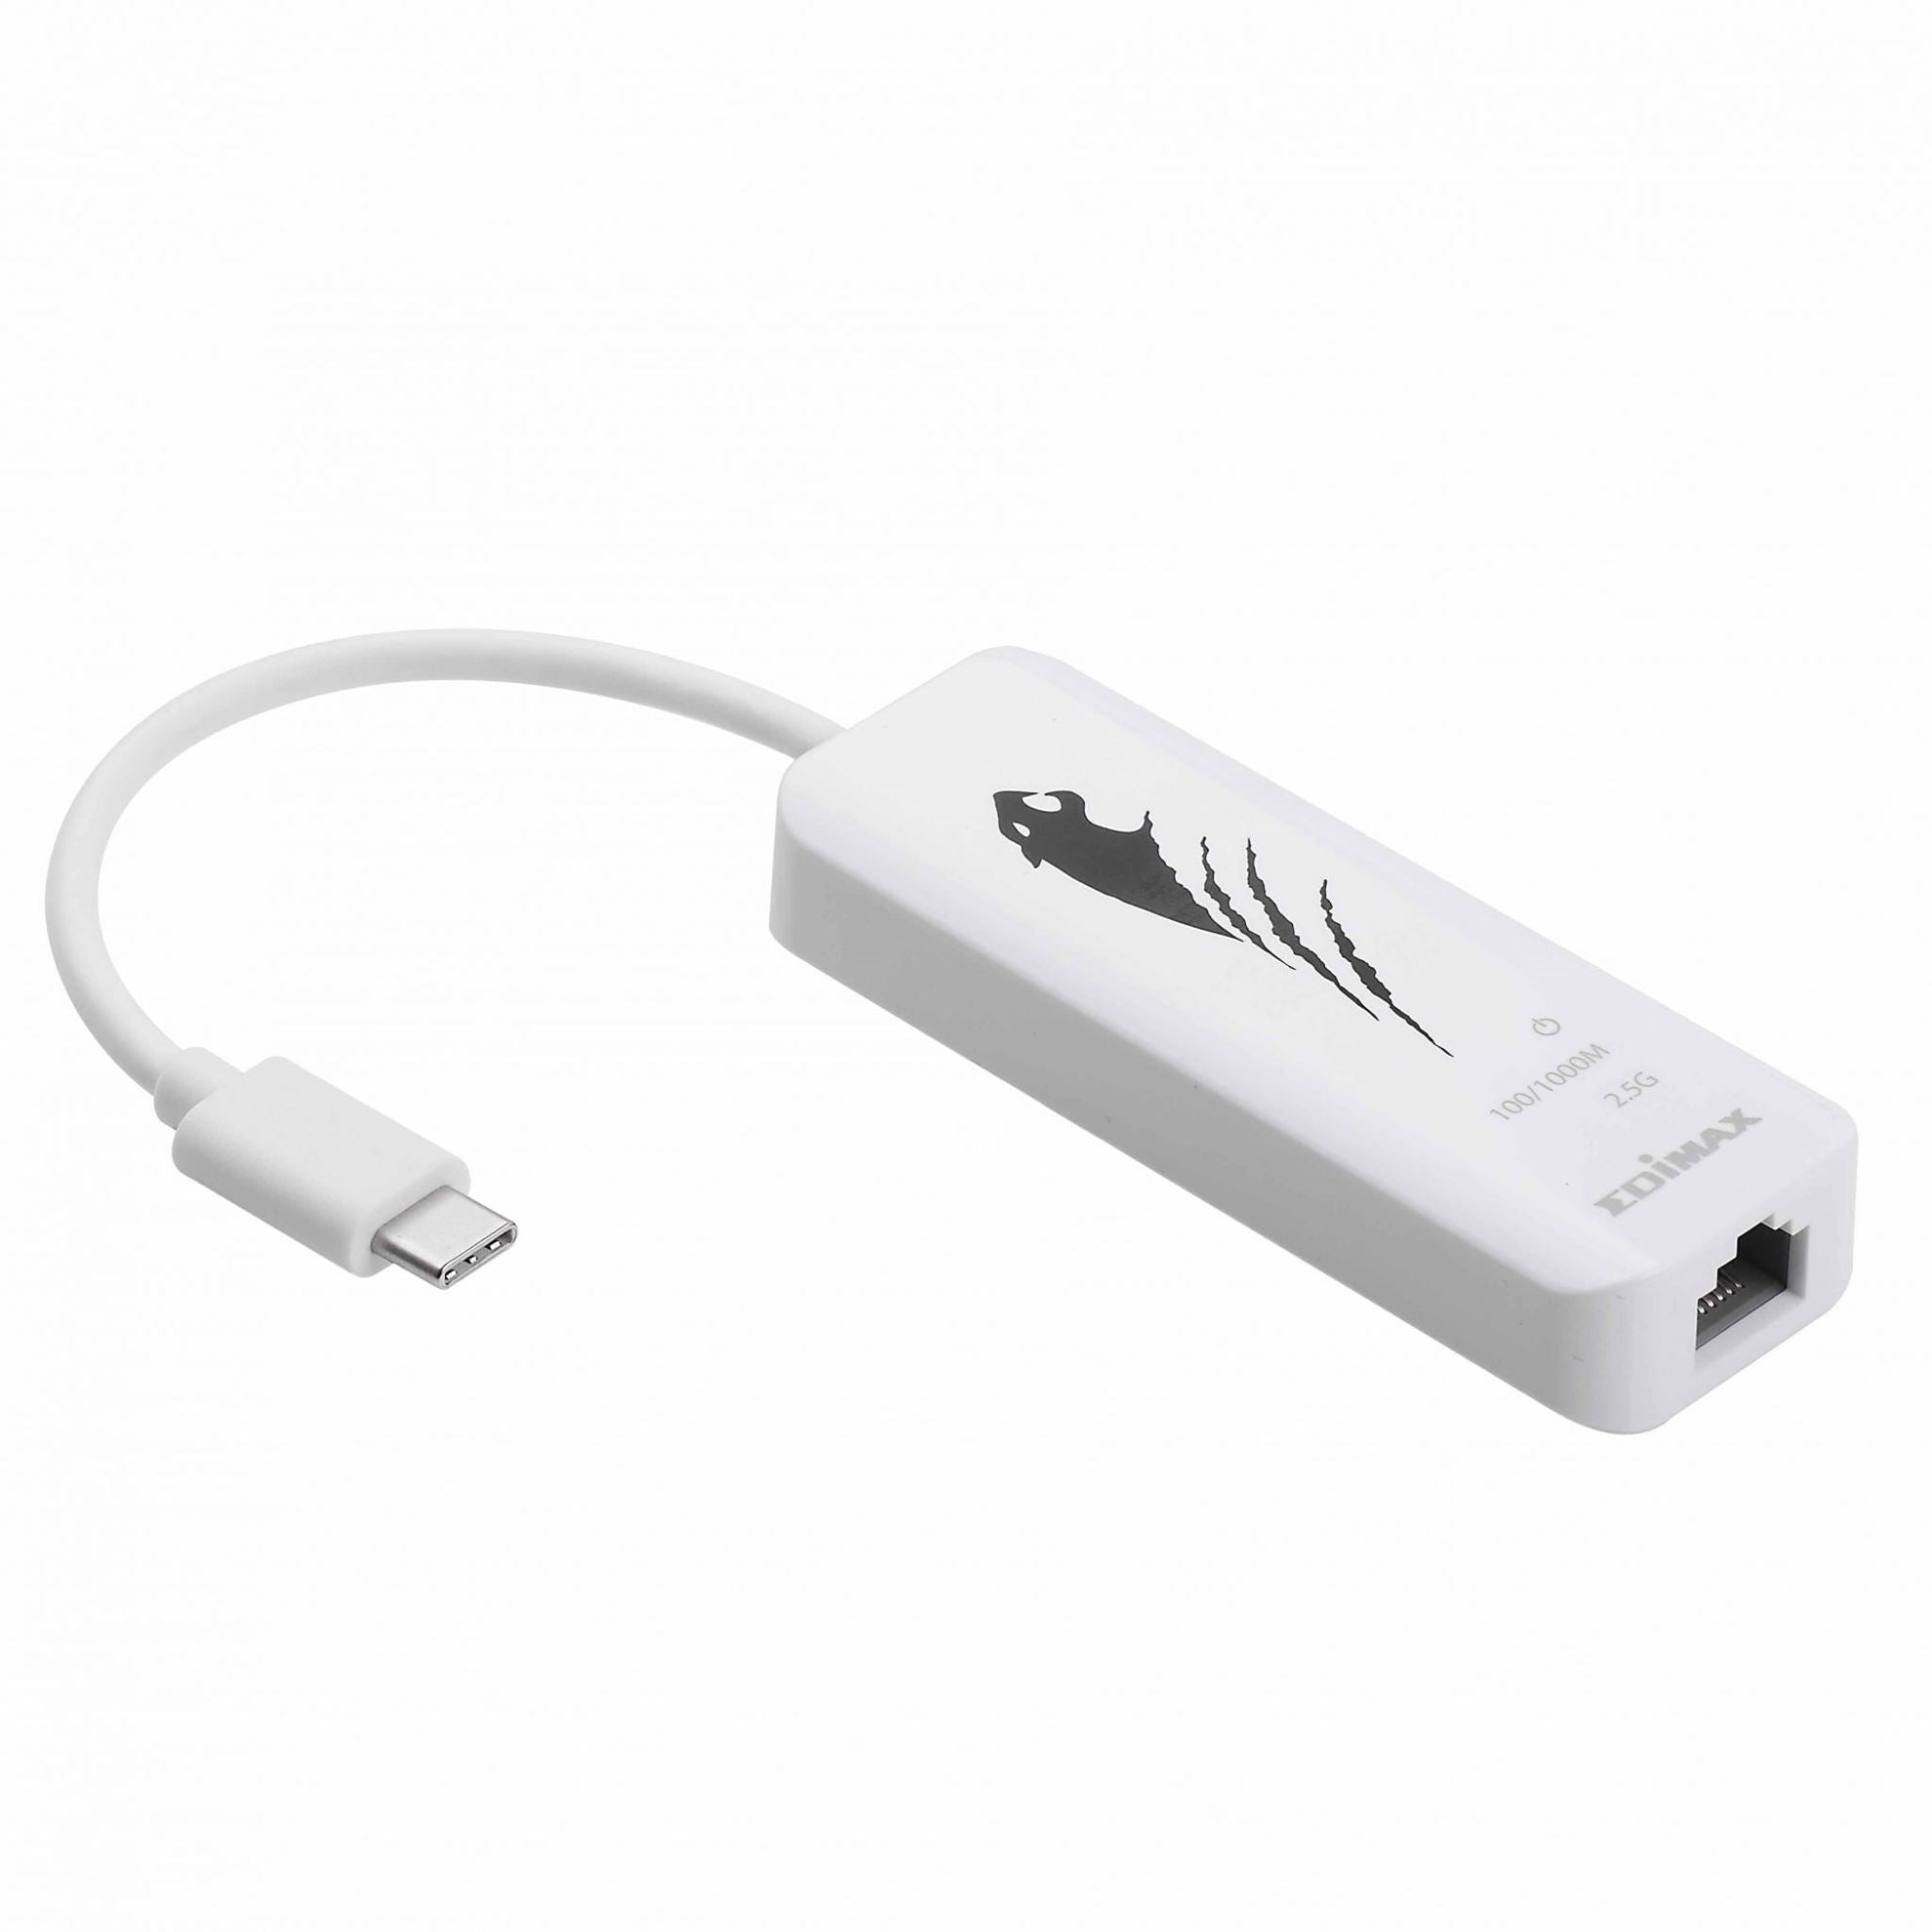 EDIMAX_USB-C_to_2.5_Gigabit_Ethernet_Adapter._Up_to_100M/1Gbps_/_2.5Gbps_Data_Speeds,_Portable,_Lightweight_Design,_LED_Indicators,_Supports_July_ON_SALE_-_Up_to_30%_OFF 1280